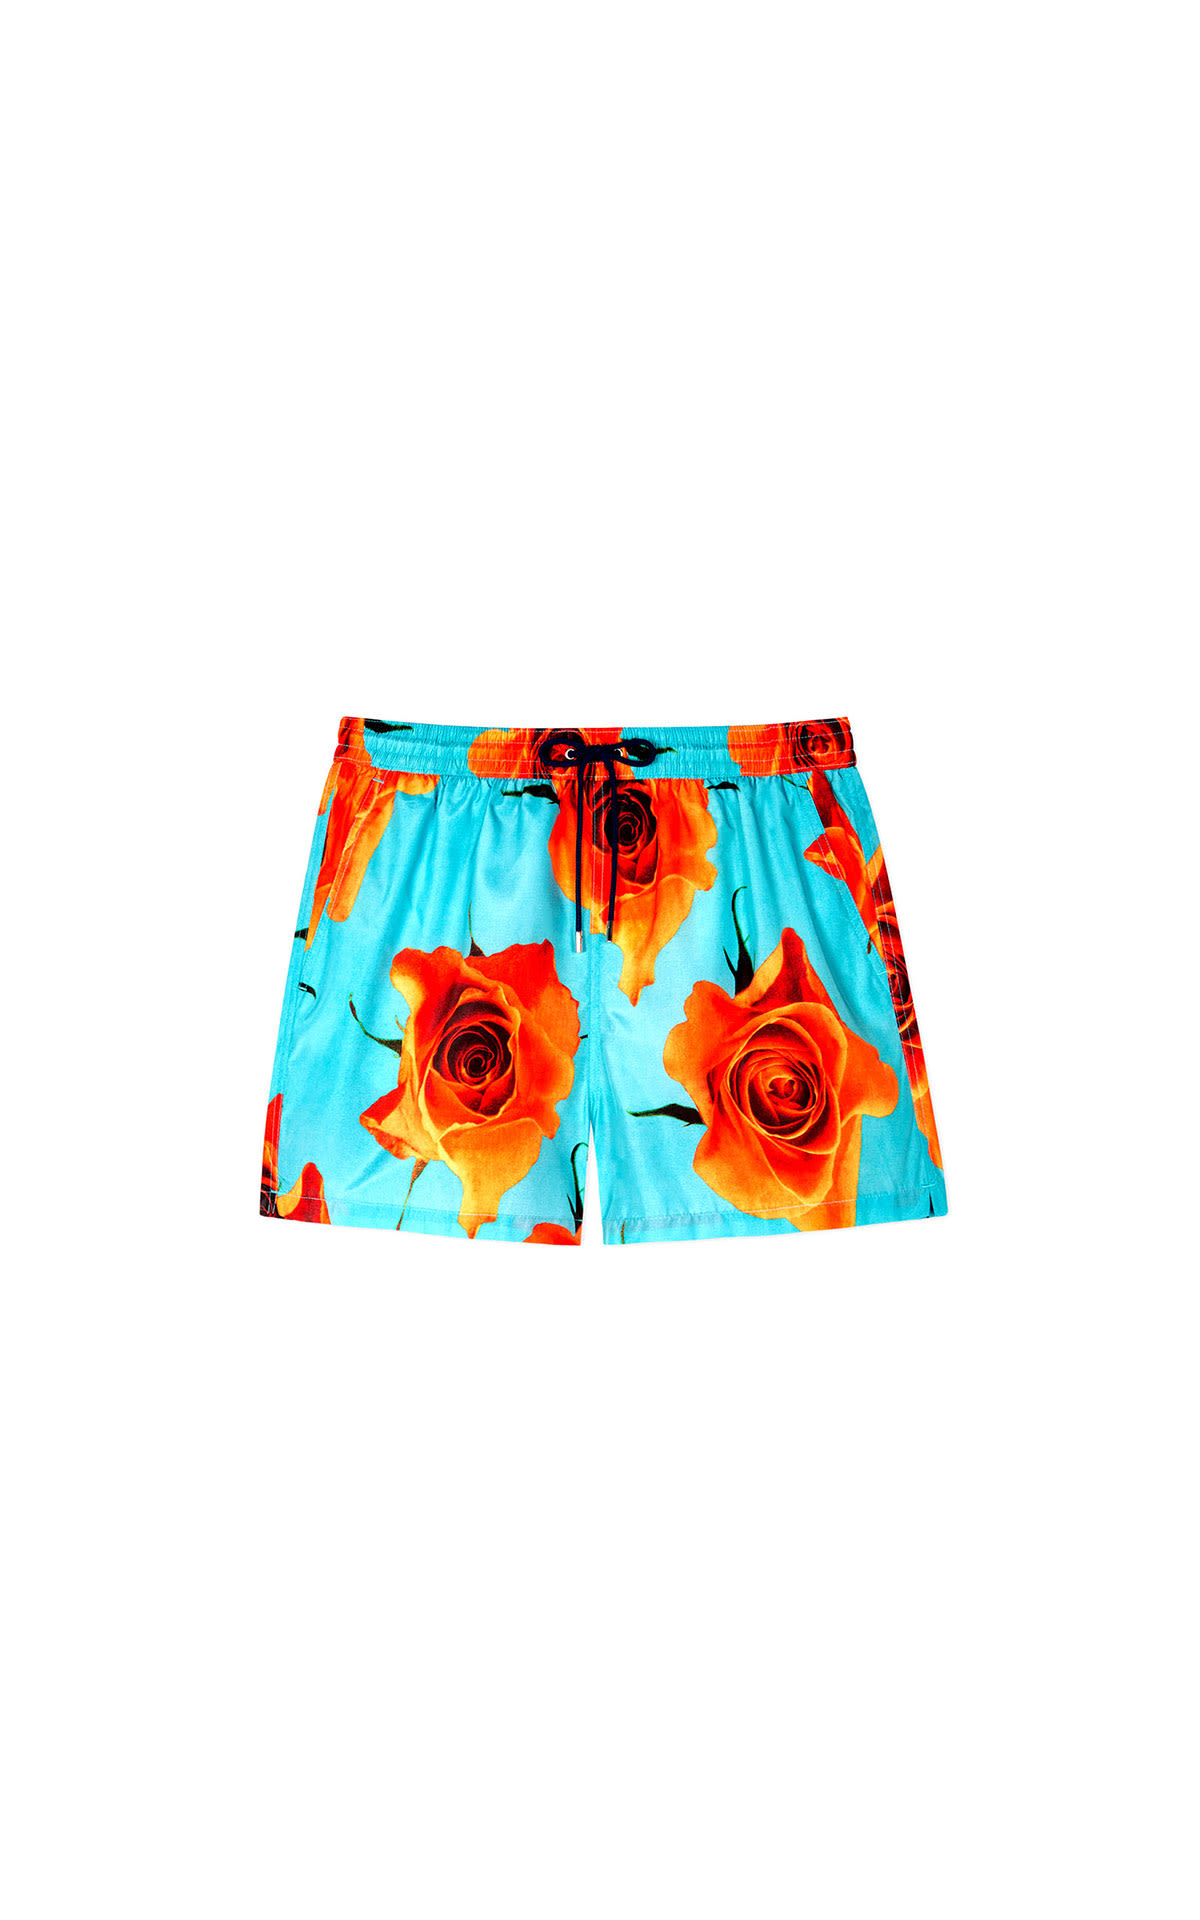 Paul Smith Rose monochrome swimshort from Bicester Village